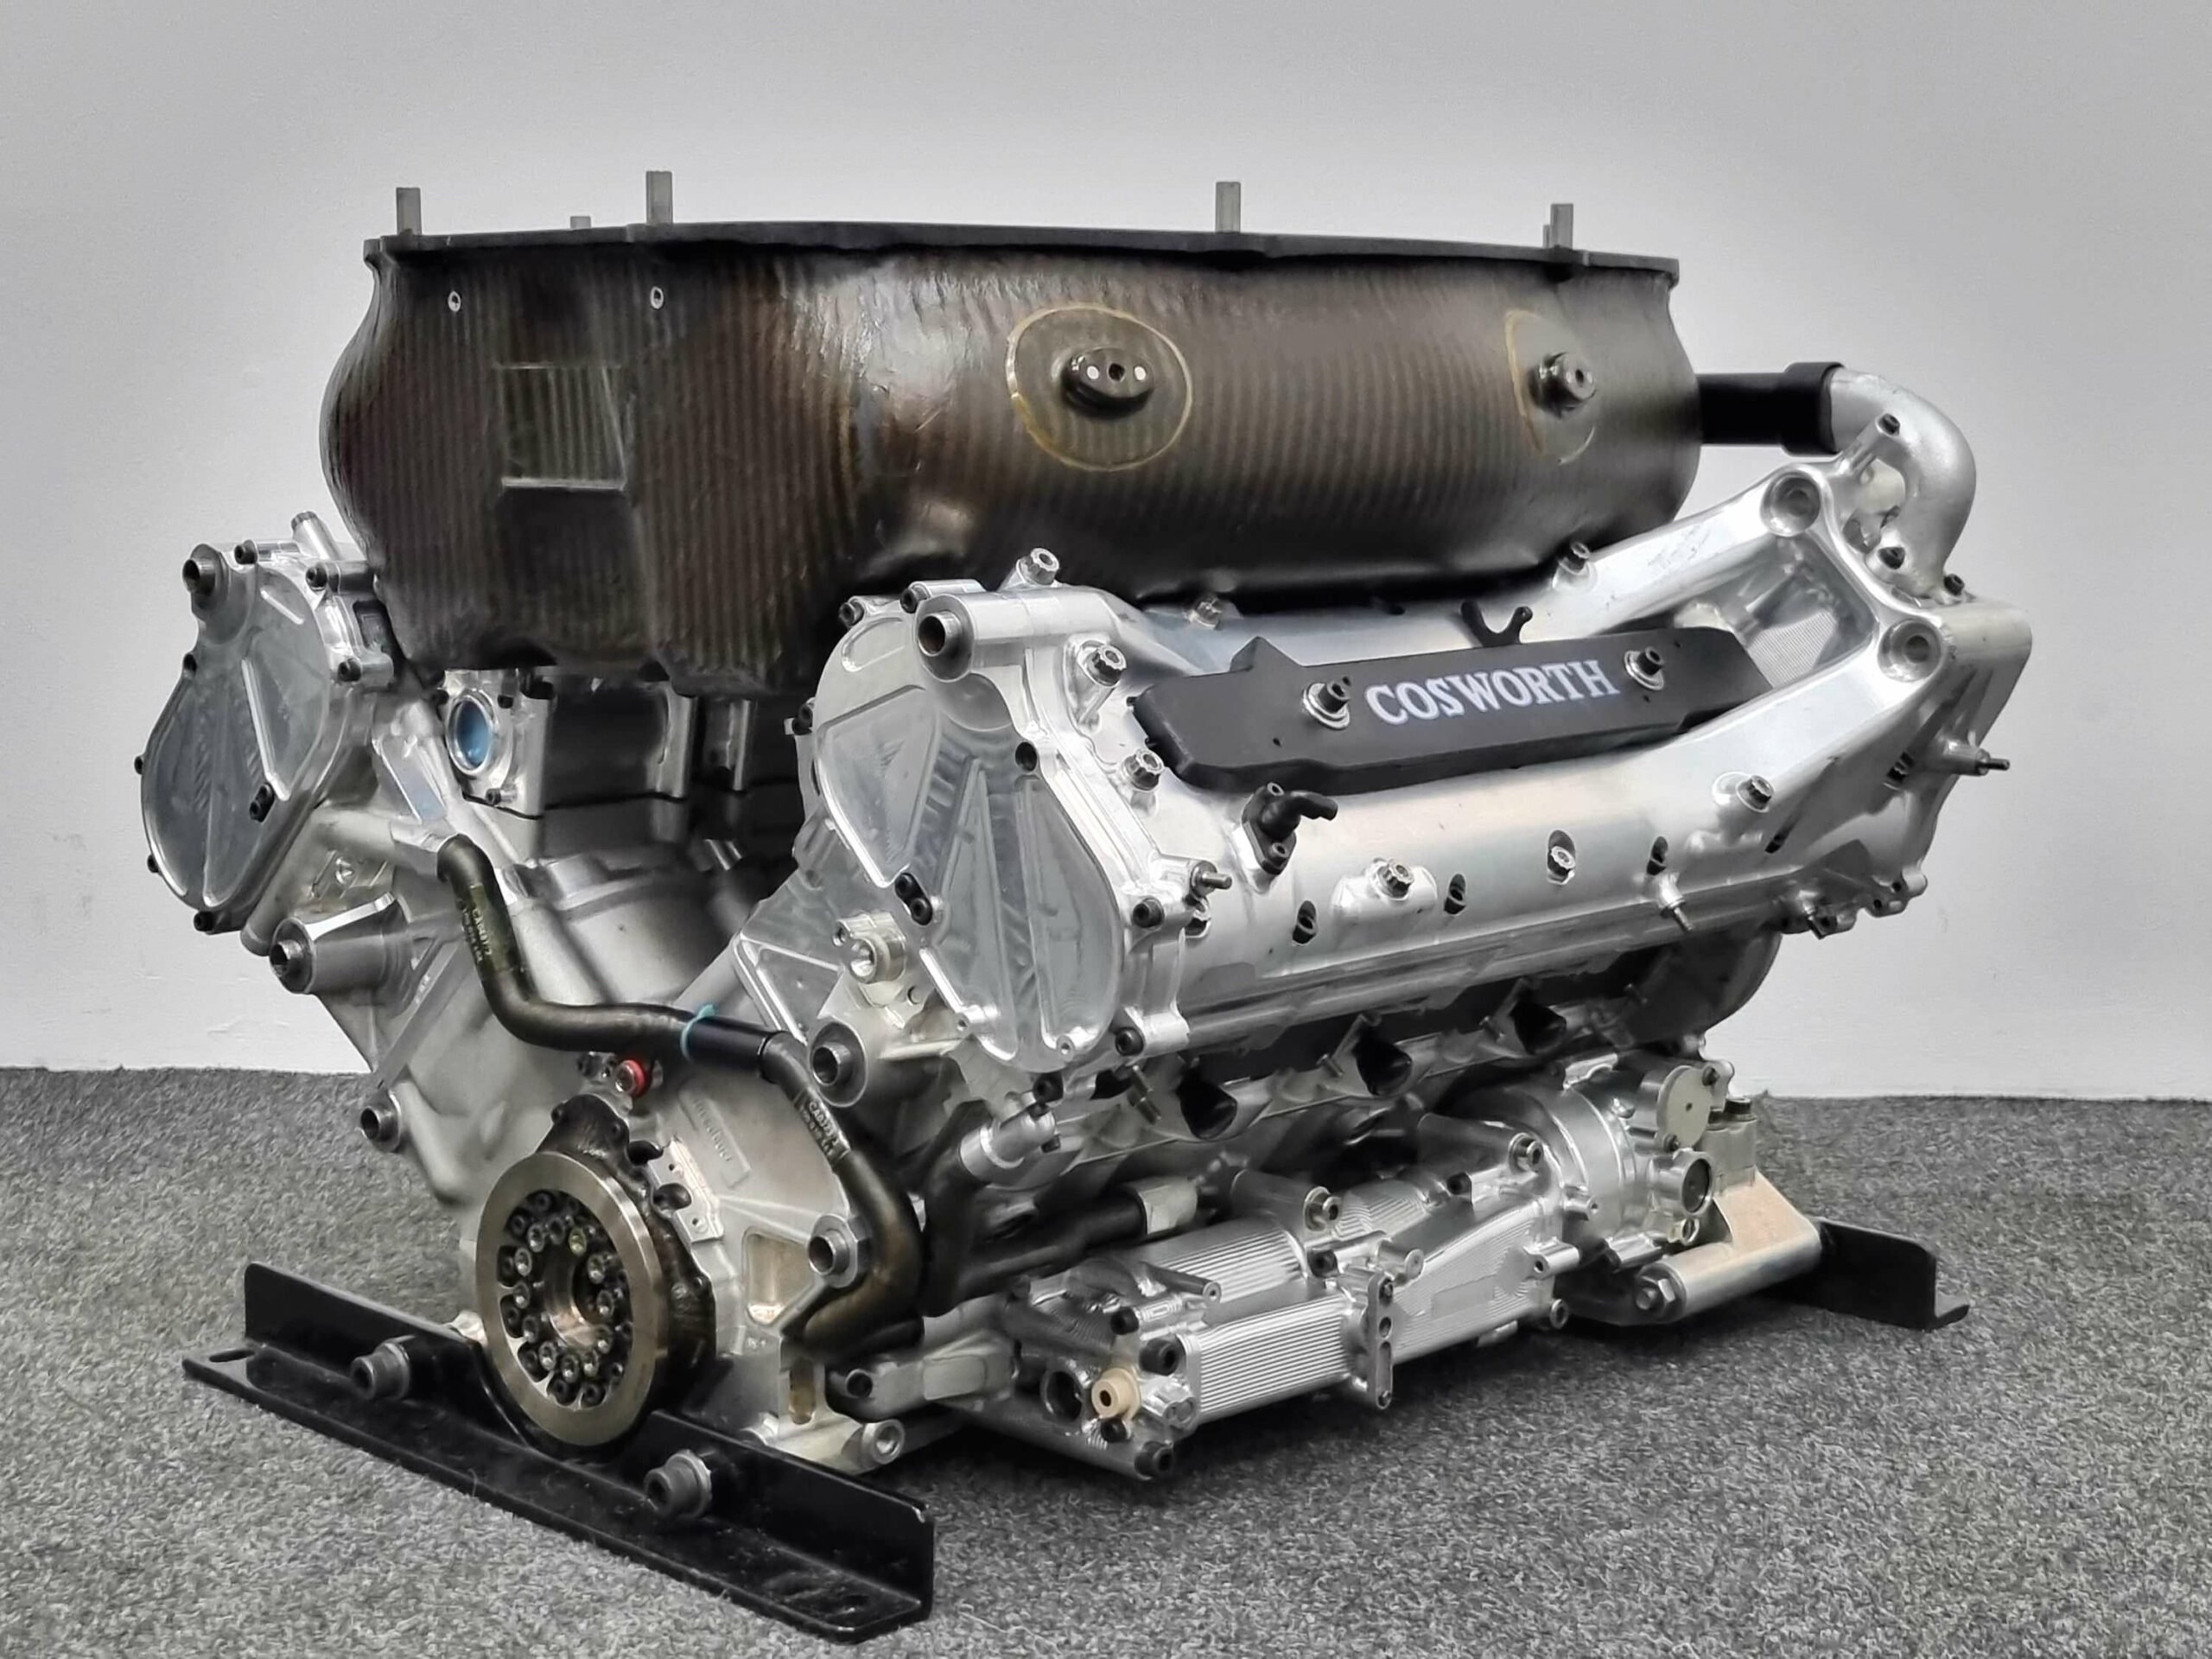 For Sale: A Cosworth CA Formula 1 Engine 915 BHP At 20,000 RPM